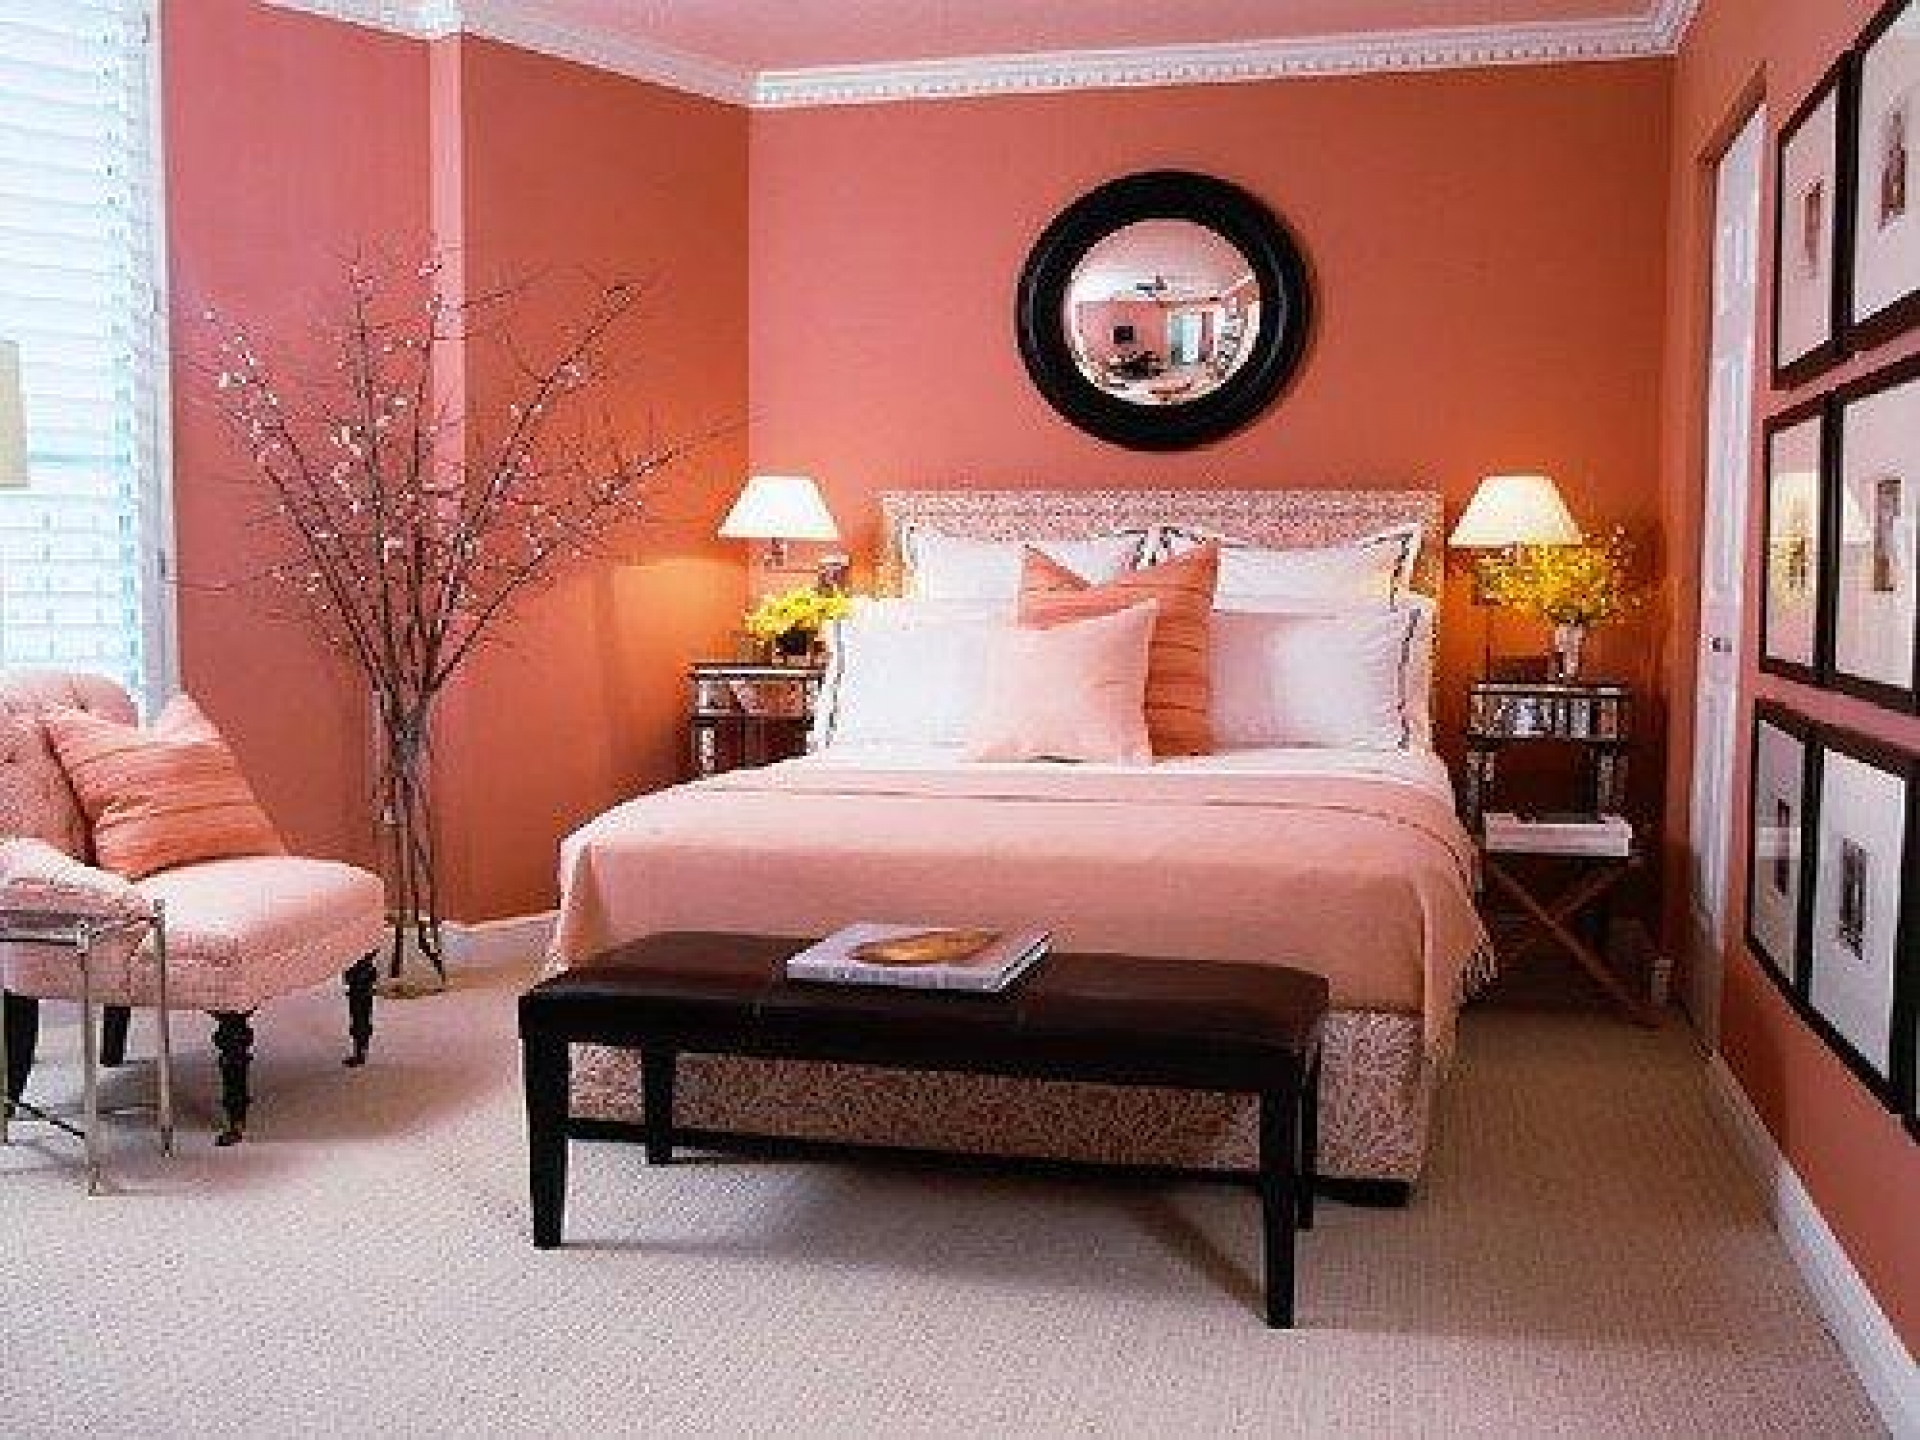 25 Beautiful Bedroom Ideas For Your Home - The WoW Style